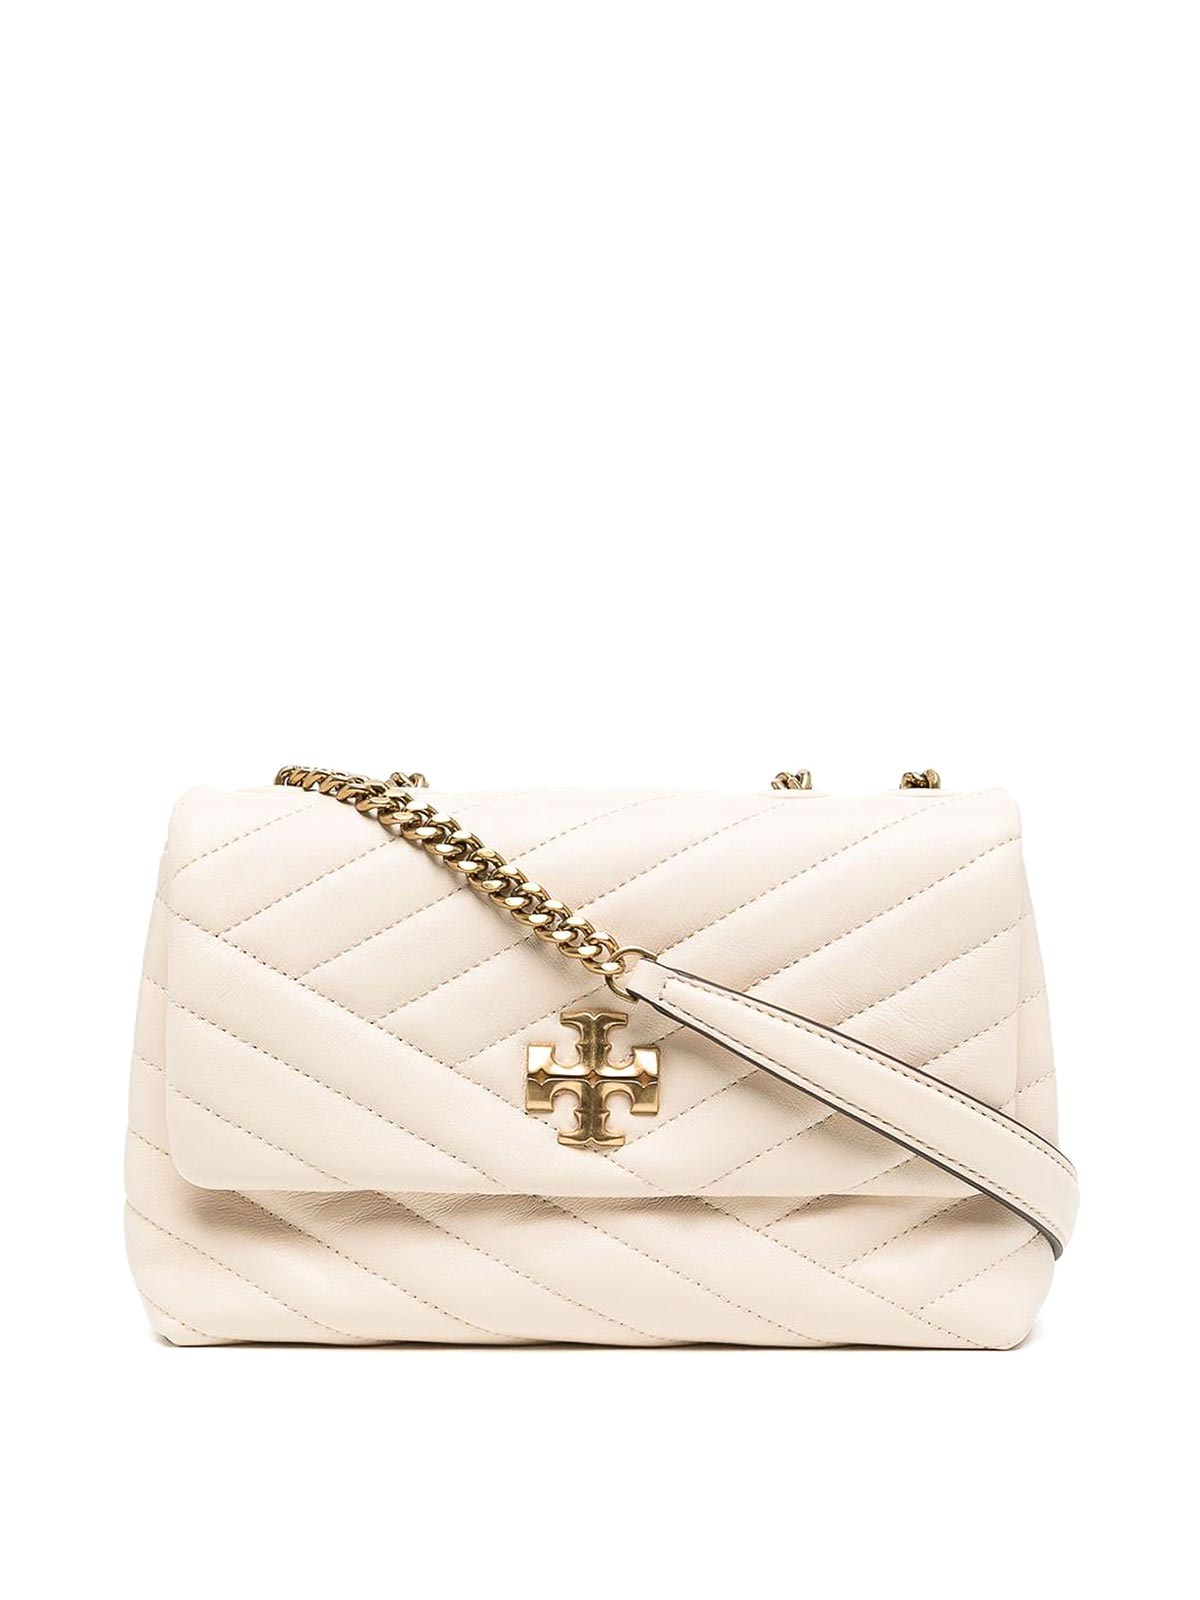 Tory Burch Kira Small Quilted Leather Shoulder Bag In Beis